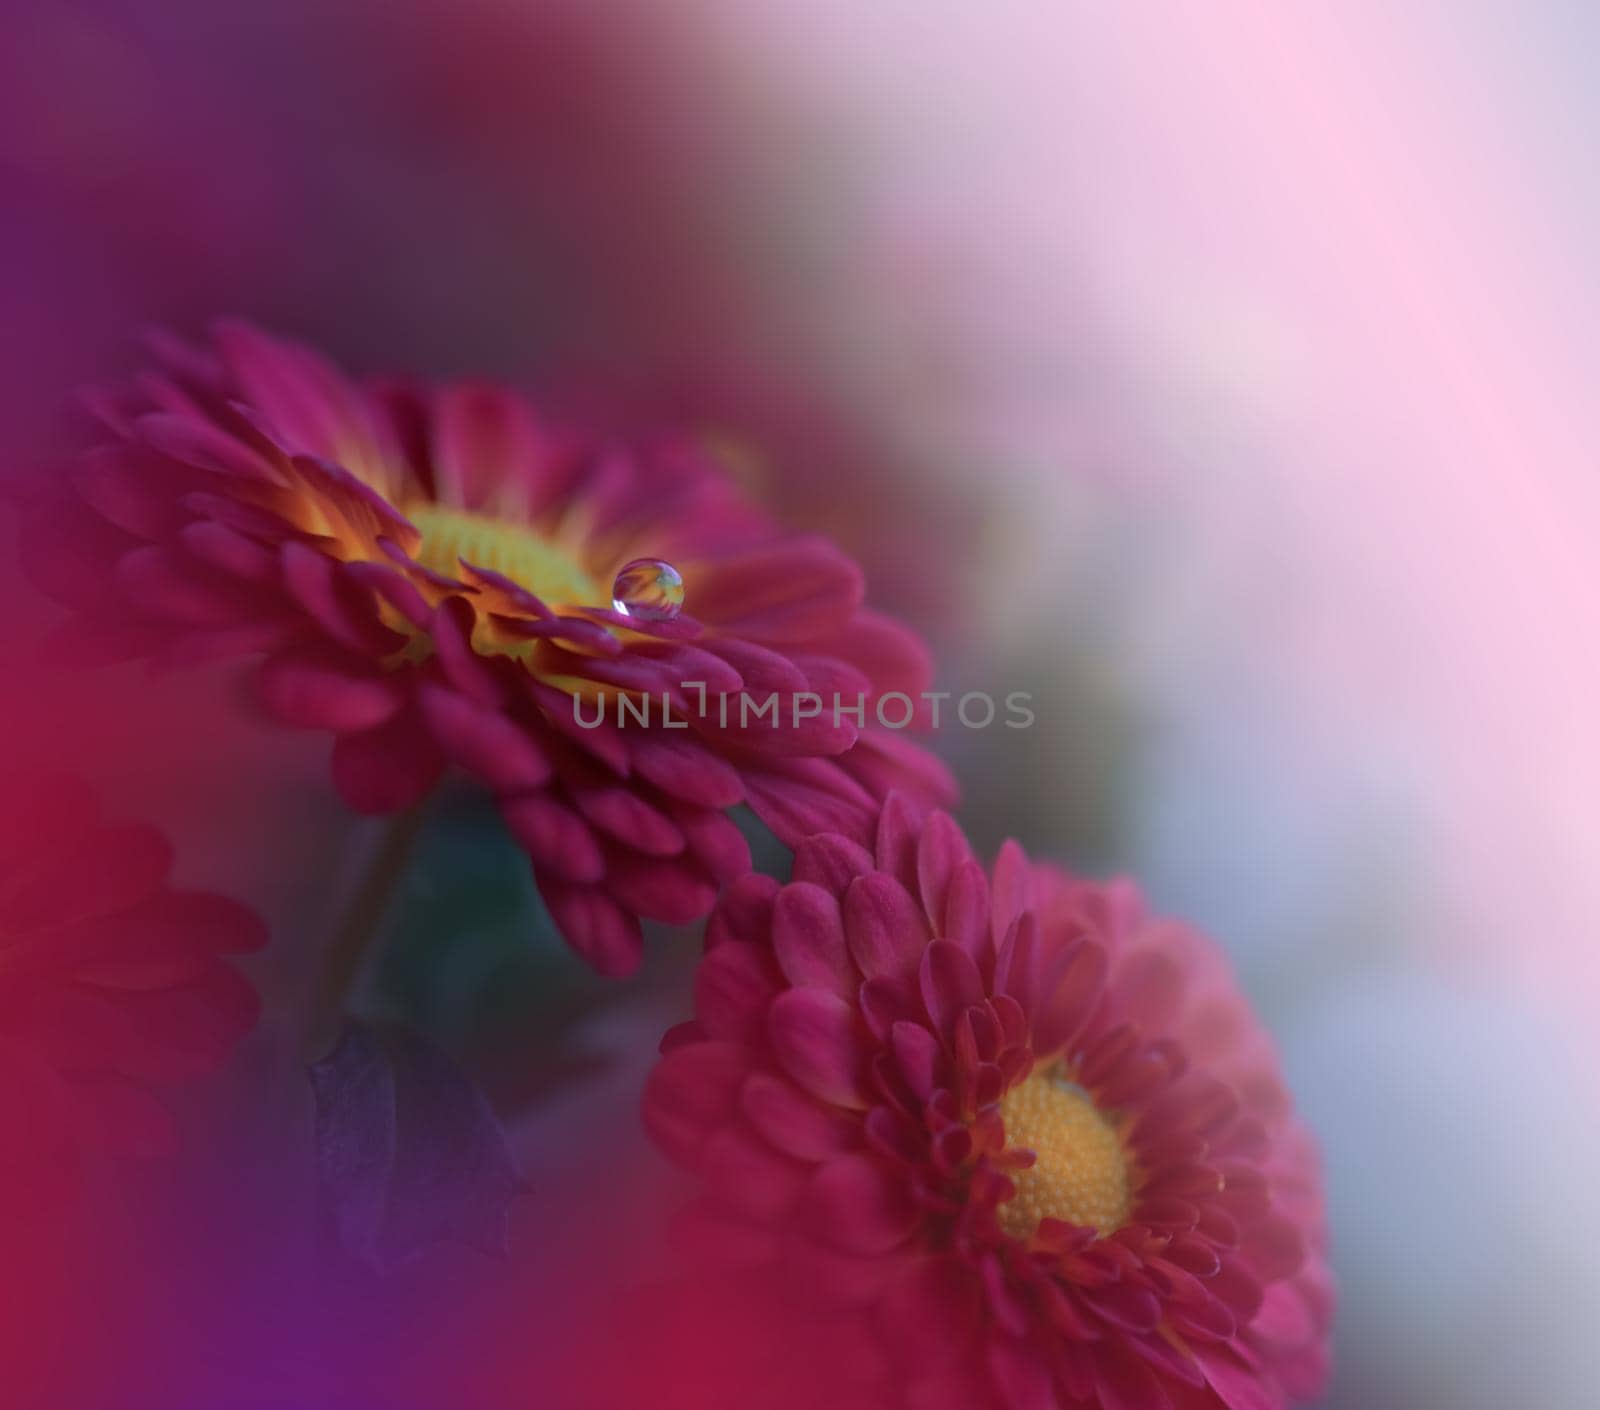 Beautiful Nature Background.Floral Art Design.Abstract Macro Photography.Red Daisy Flower.Pastel Flowers.Pink Background.Creative Artistic Wallpaper.Wedding Invitation.Celebration,love.Close up View.Happy Holidays.Violet Color.Copy Space.Water Drop.